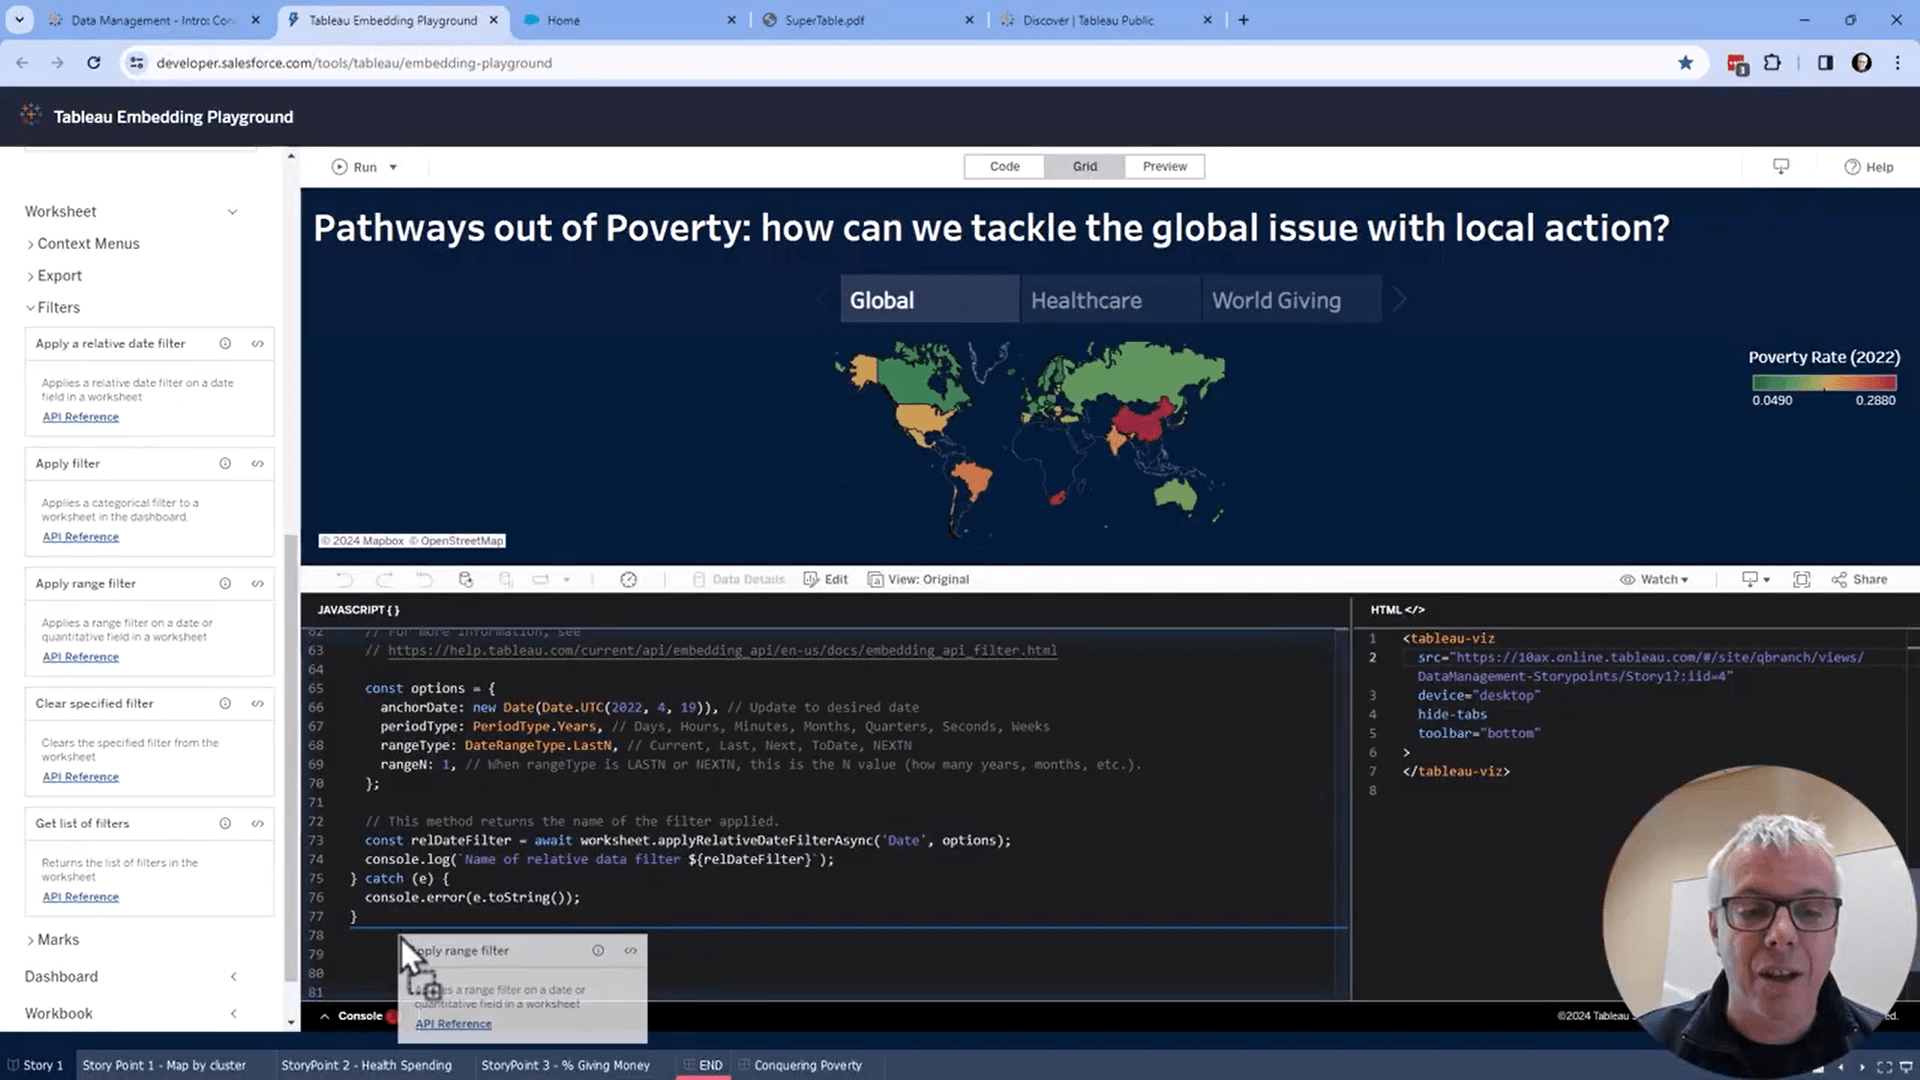 Top half of screen is dark blue dashboard with rainbow-colored map of poverty rates by country. Bottom half of screen is black showing source code in yellow. Left menu is white with vertical list of dropdown menus to change the dashboard's appearance.